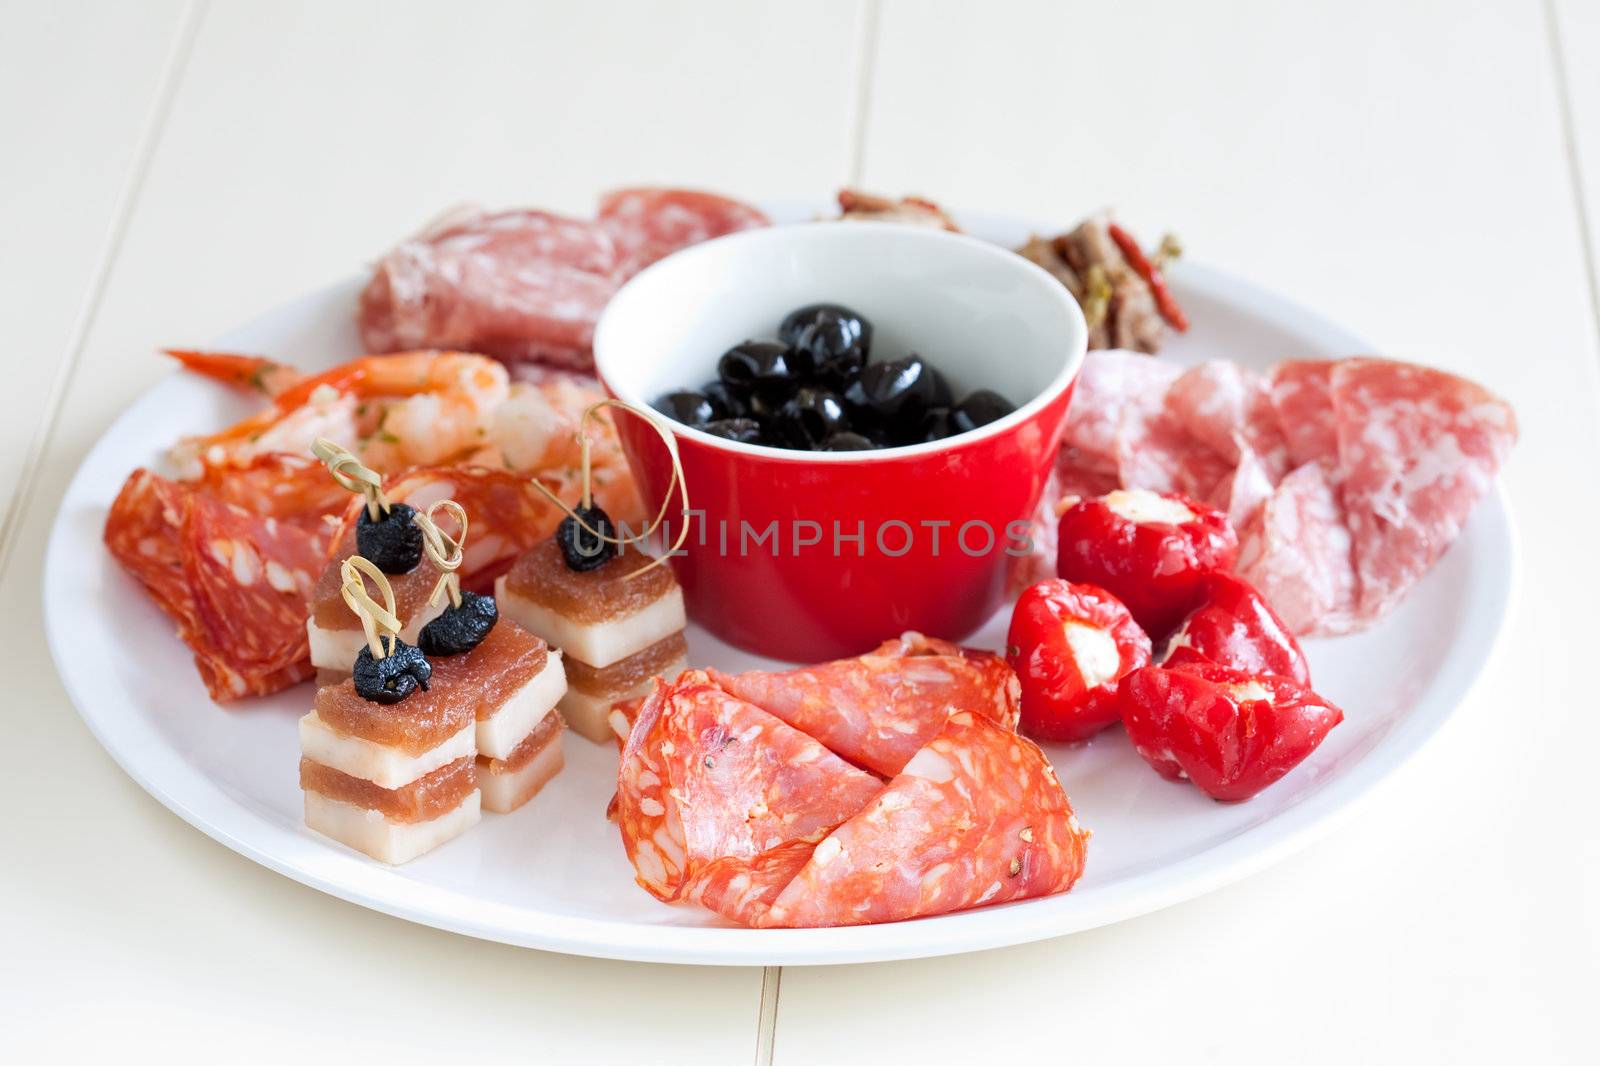 Delicious plate of antipasti by Fotosmurf